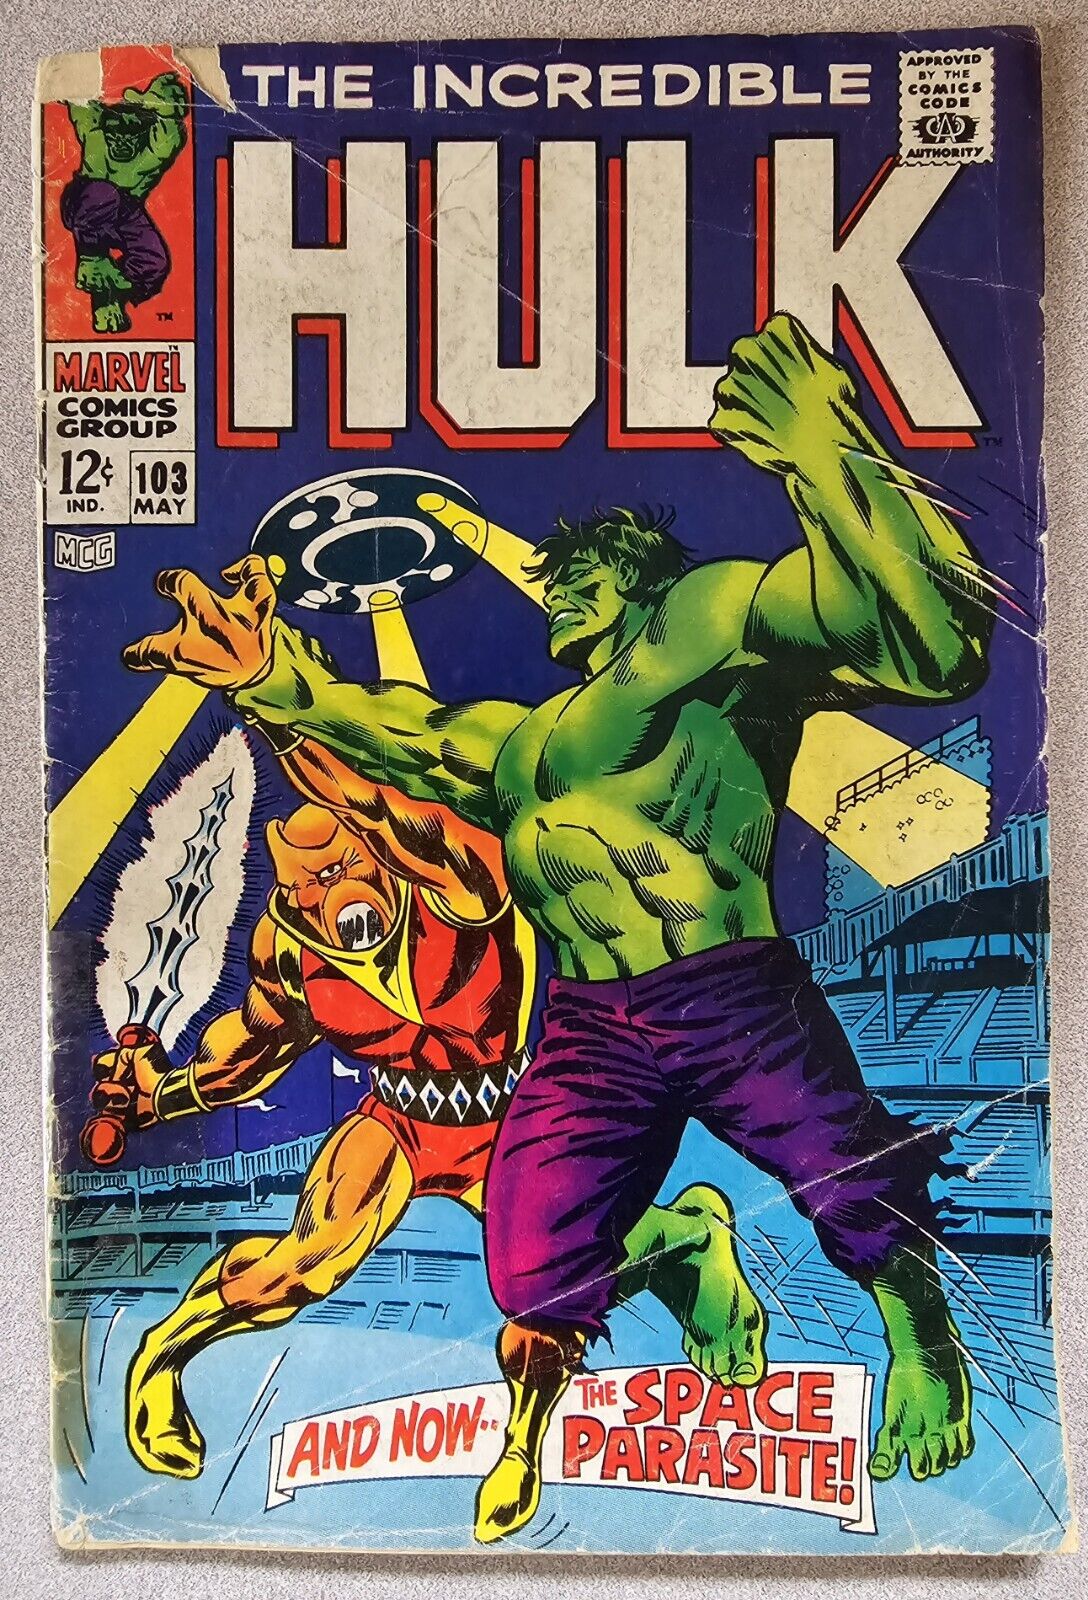 1967 Incredible Hulk #103  - First appearance of Space Parasite 